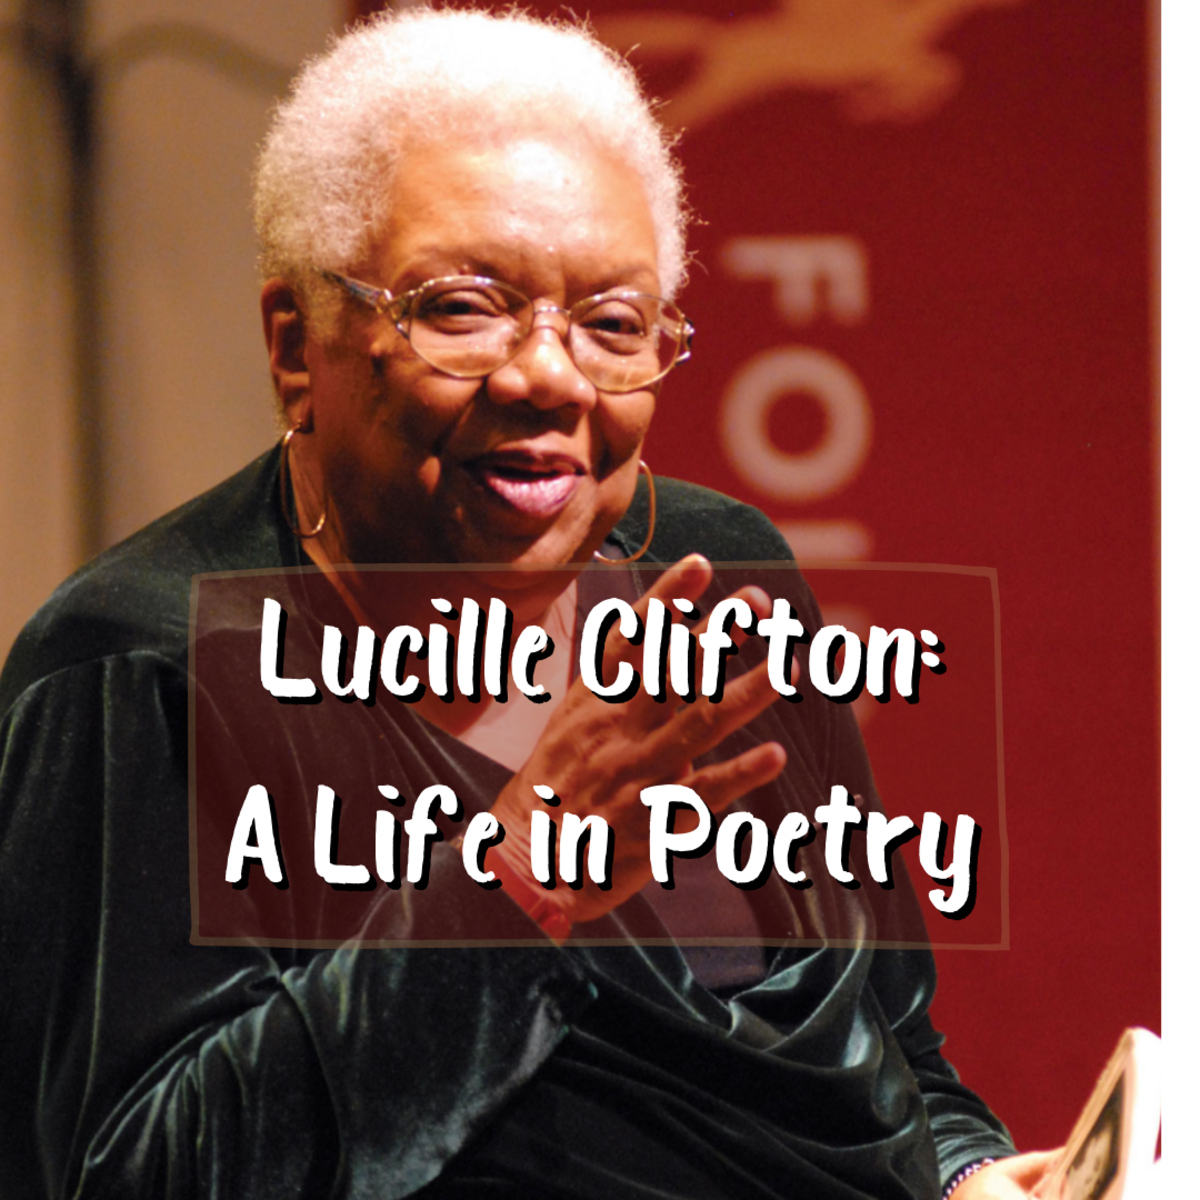 Lucille Clifton: A Life in Poetry